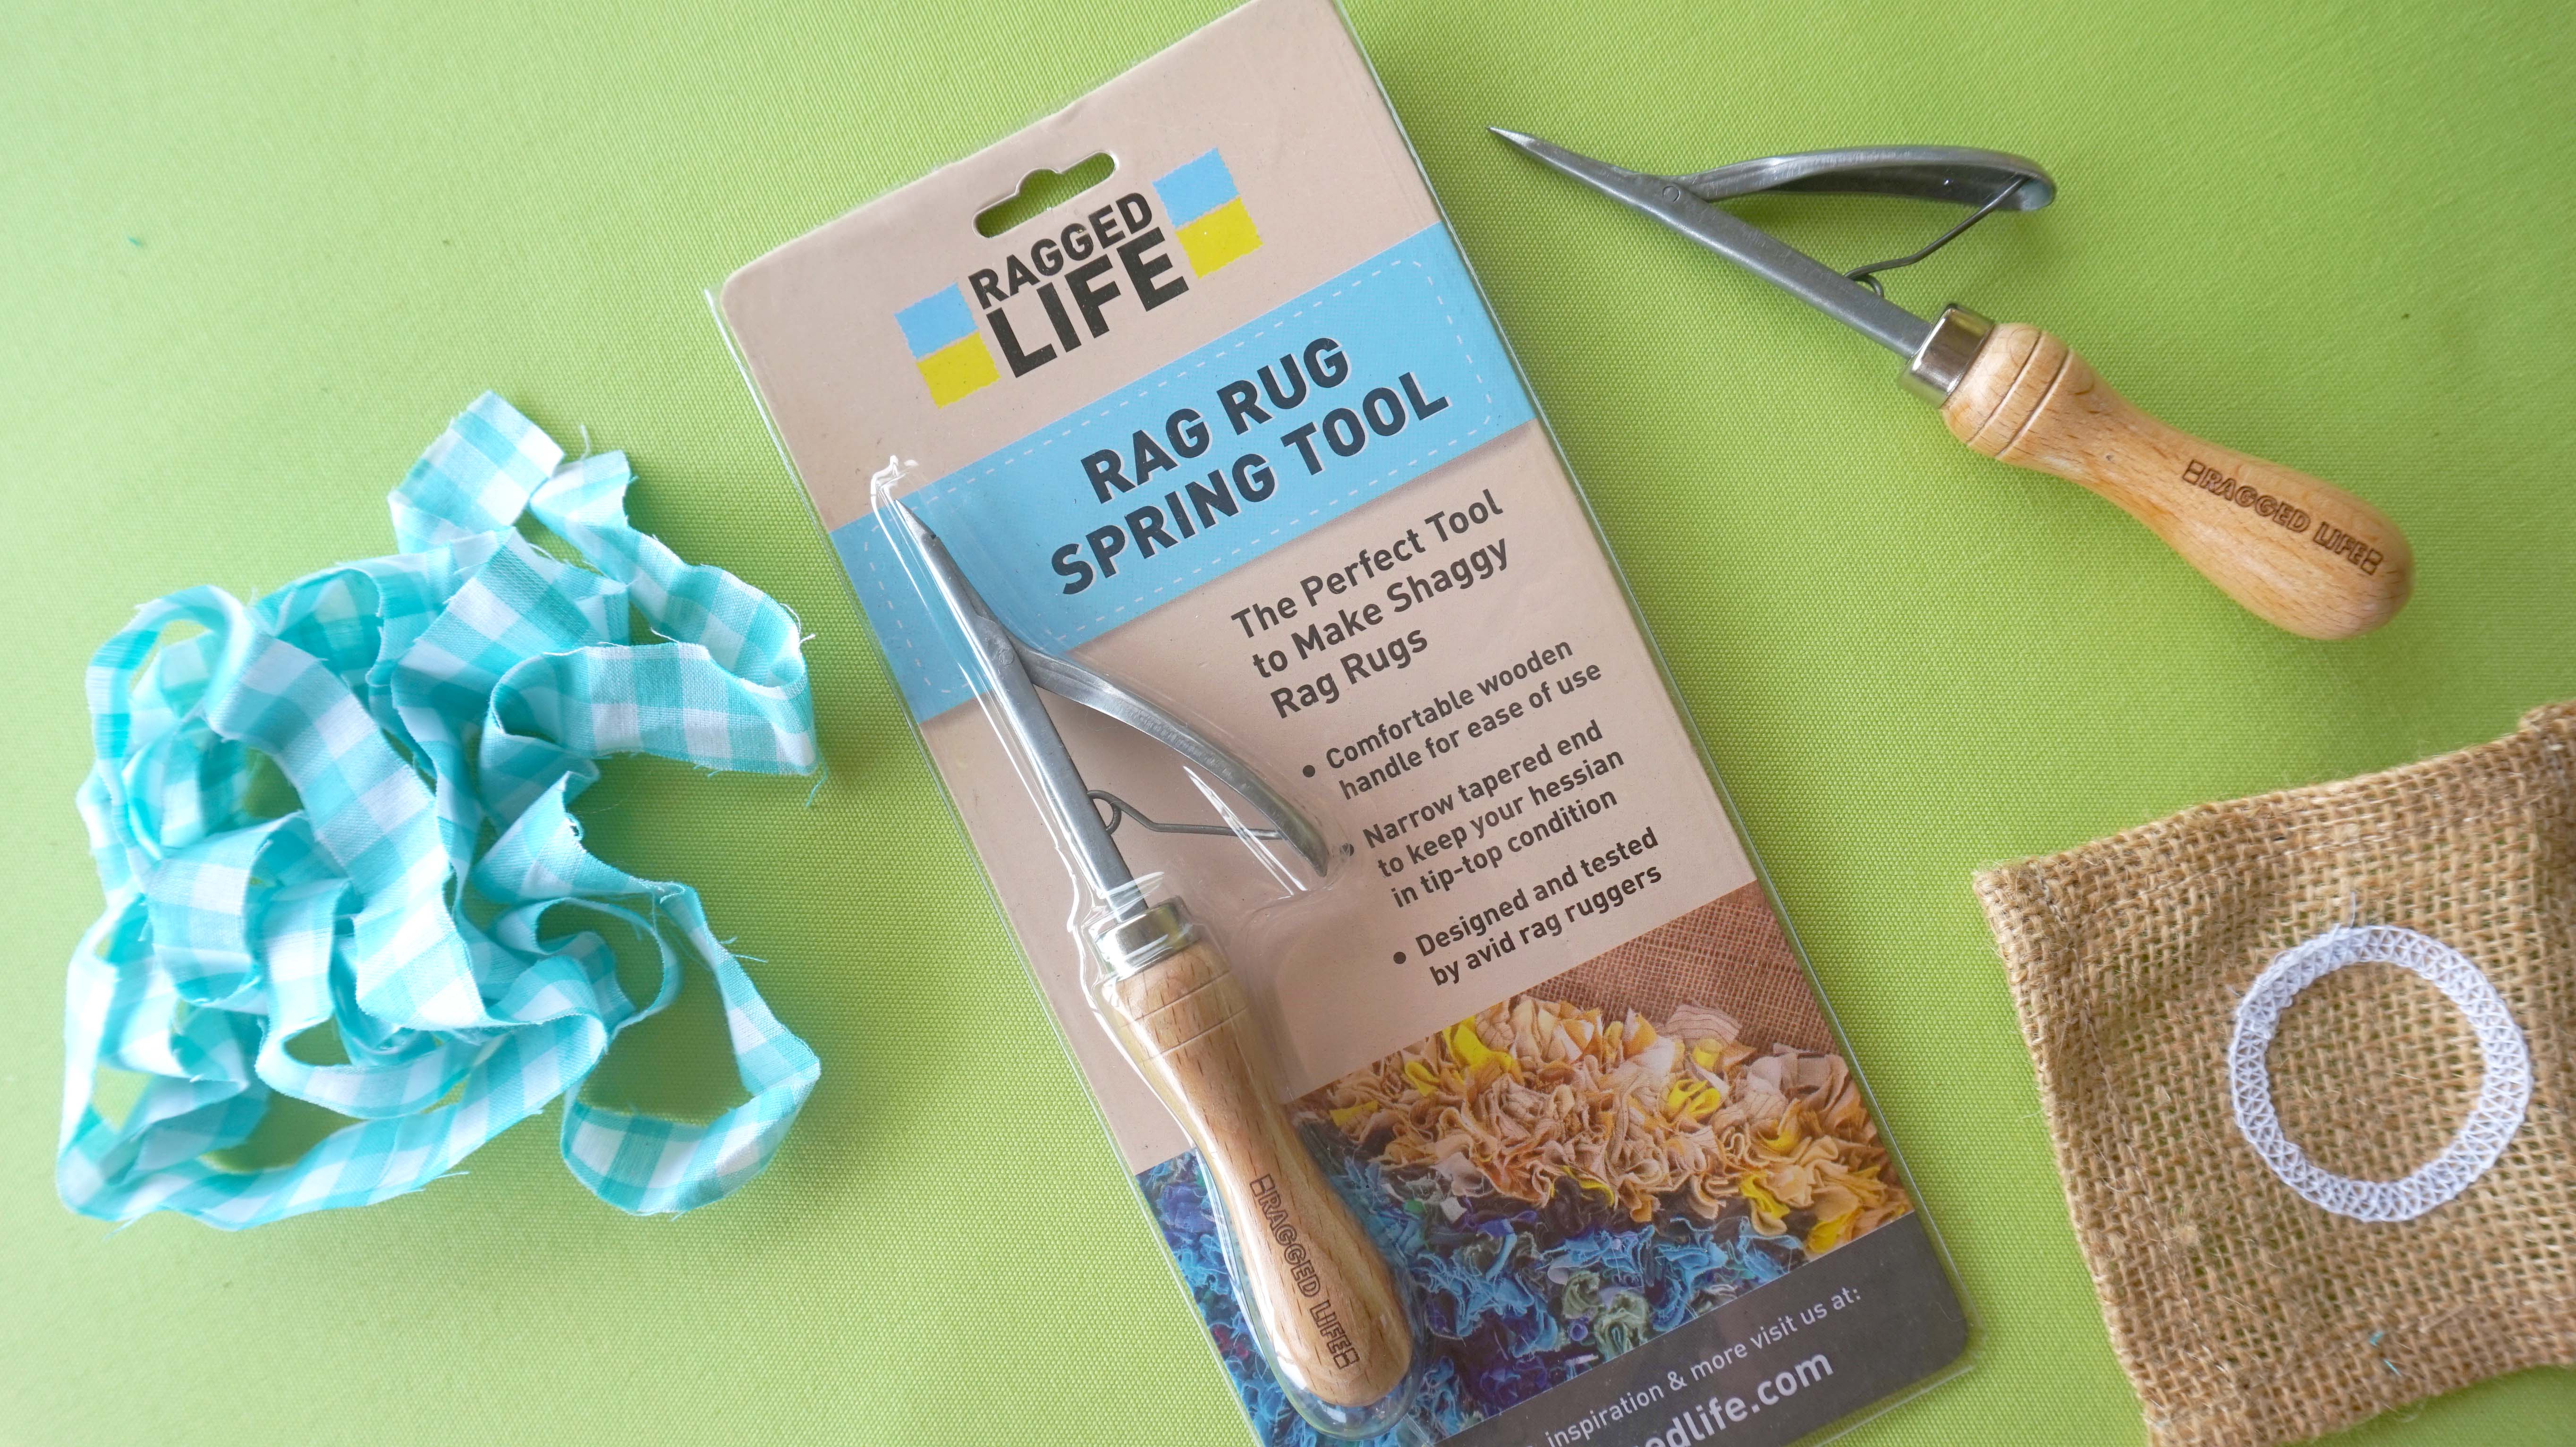 New Ragged Life rag rug spring tool in packaging with rag rug hessian and rags